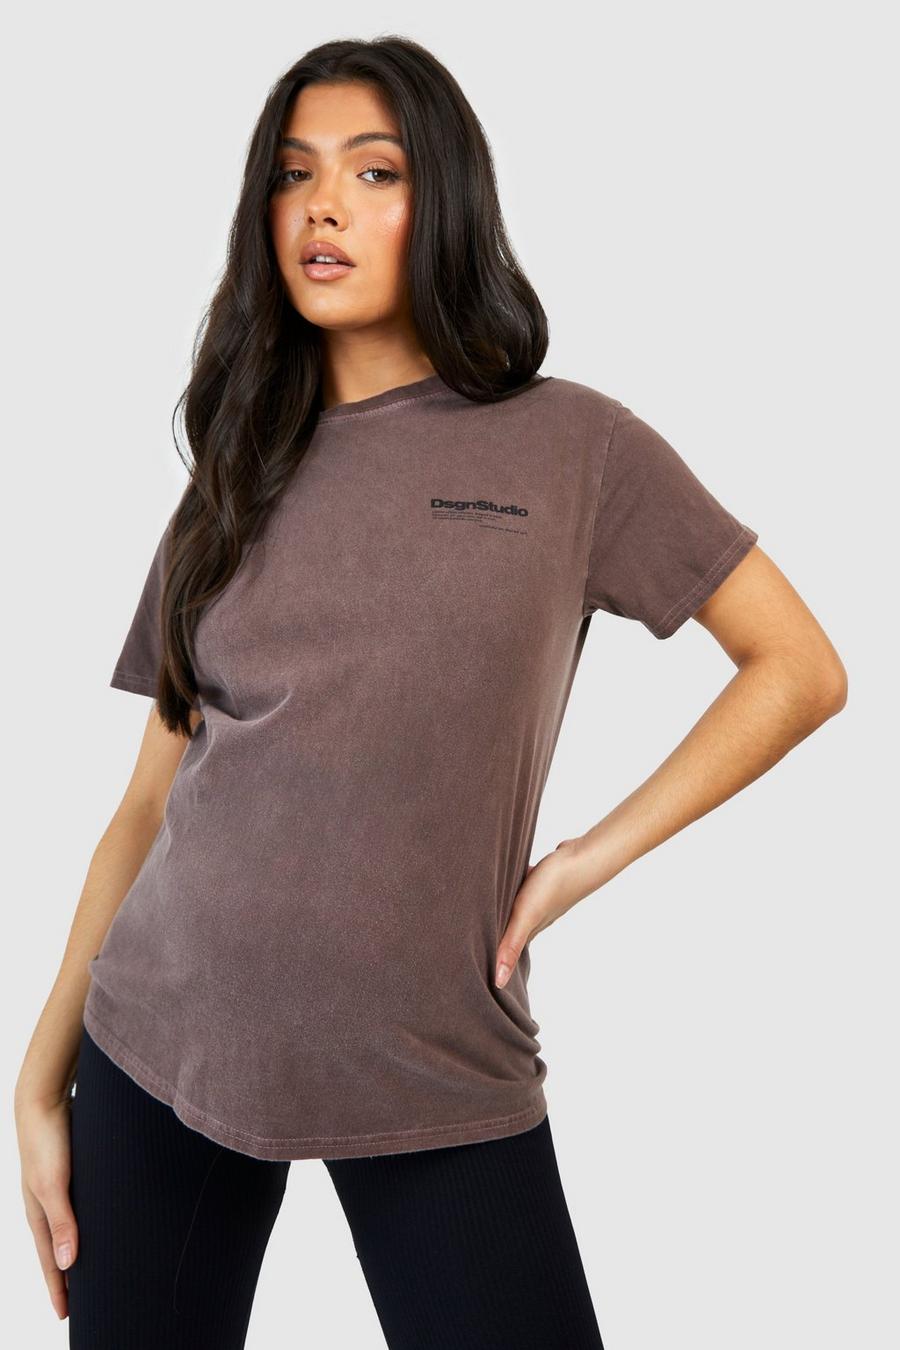 Chocolate brown Maternity Pocket Dsgn Studio Washed T-Shirt